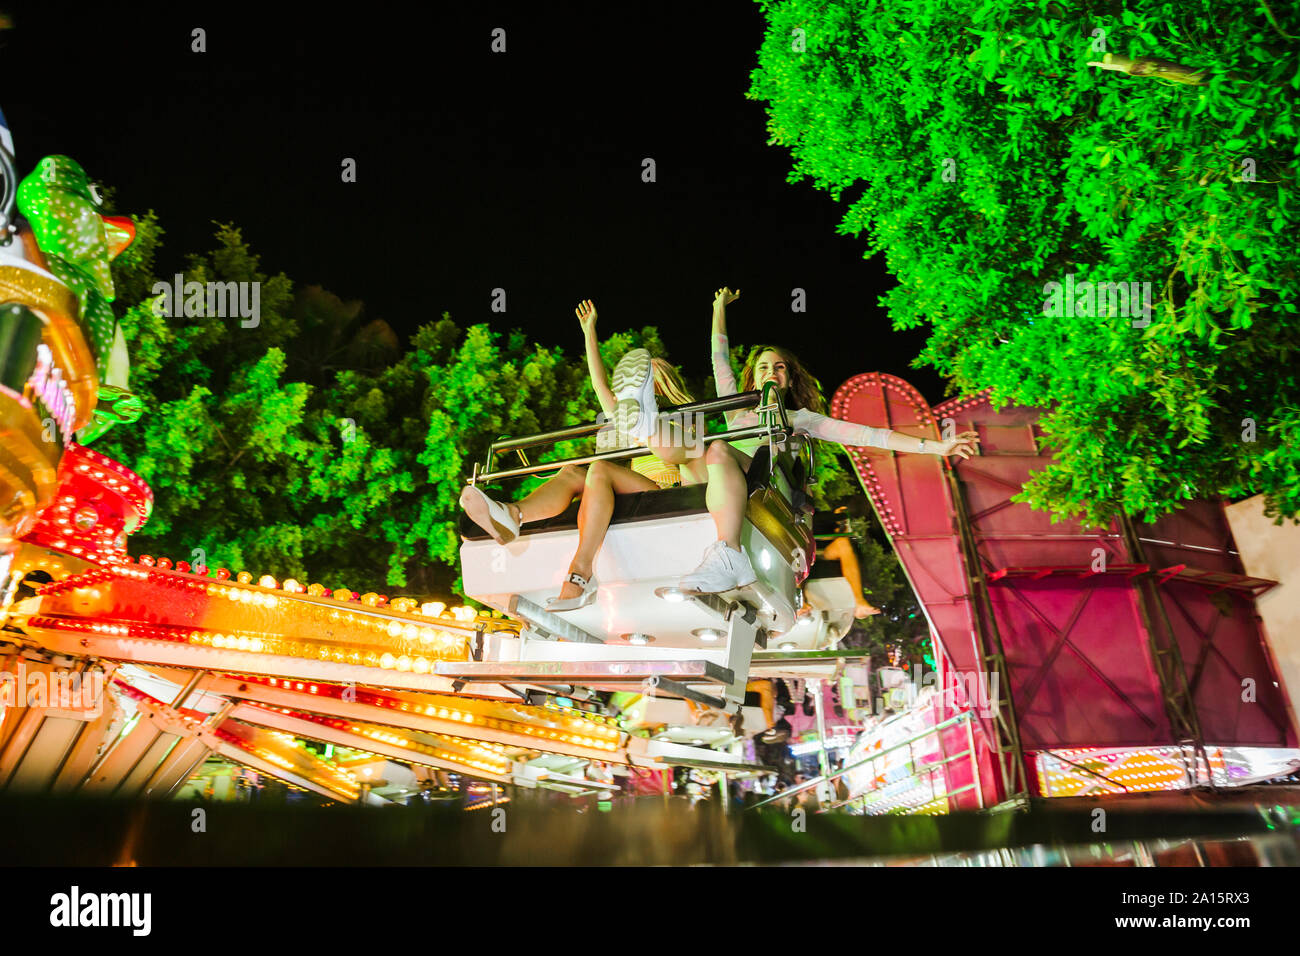 Two excited young women in a fairground ride on a funfair at night Stock Photo